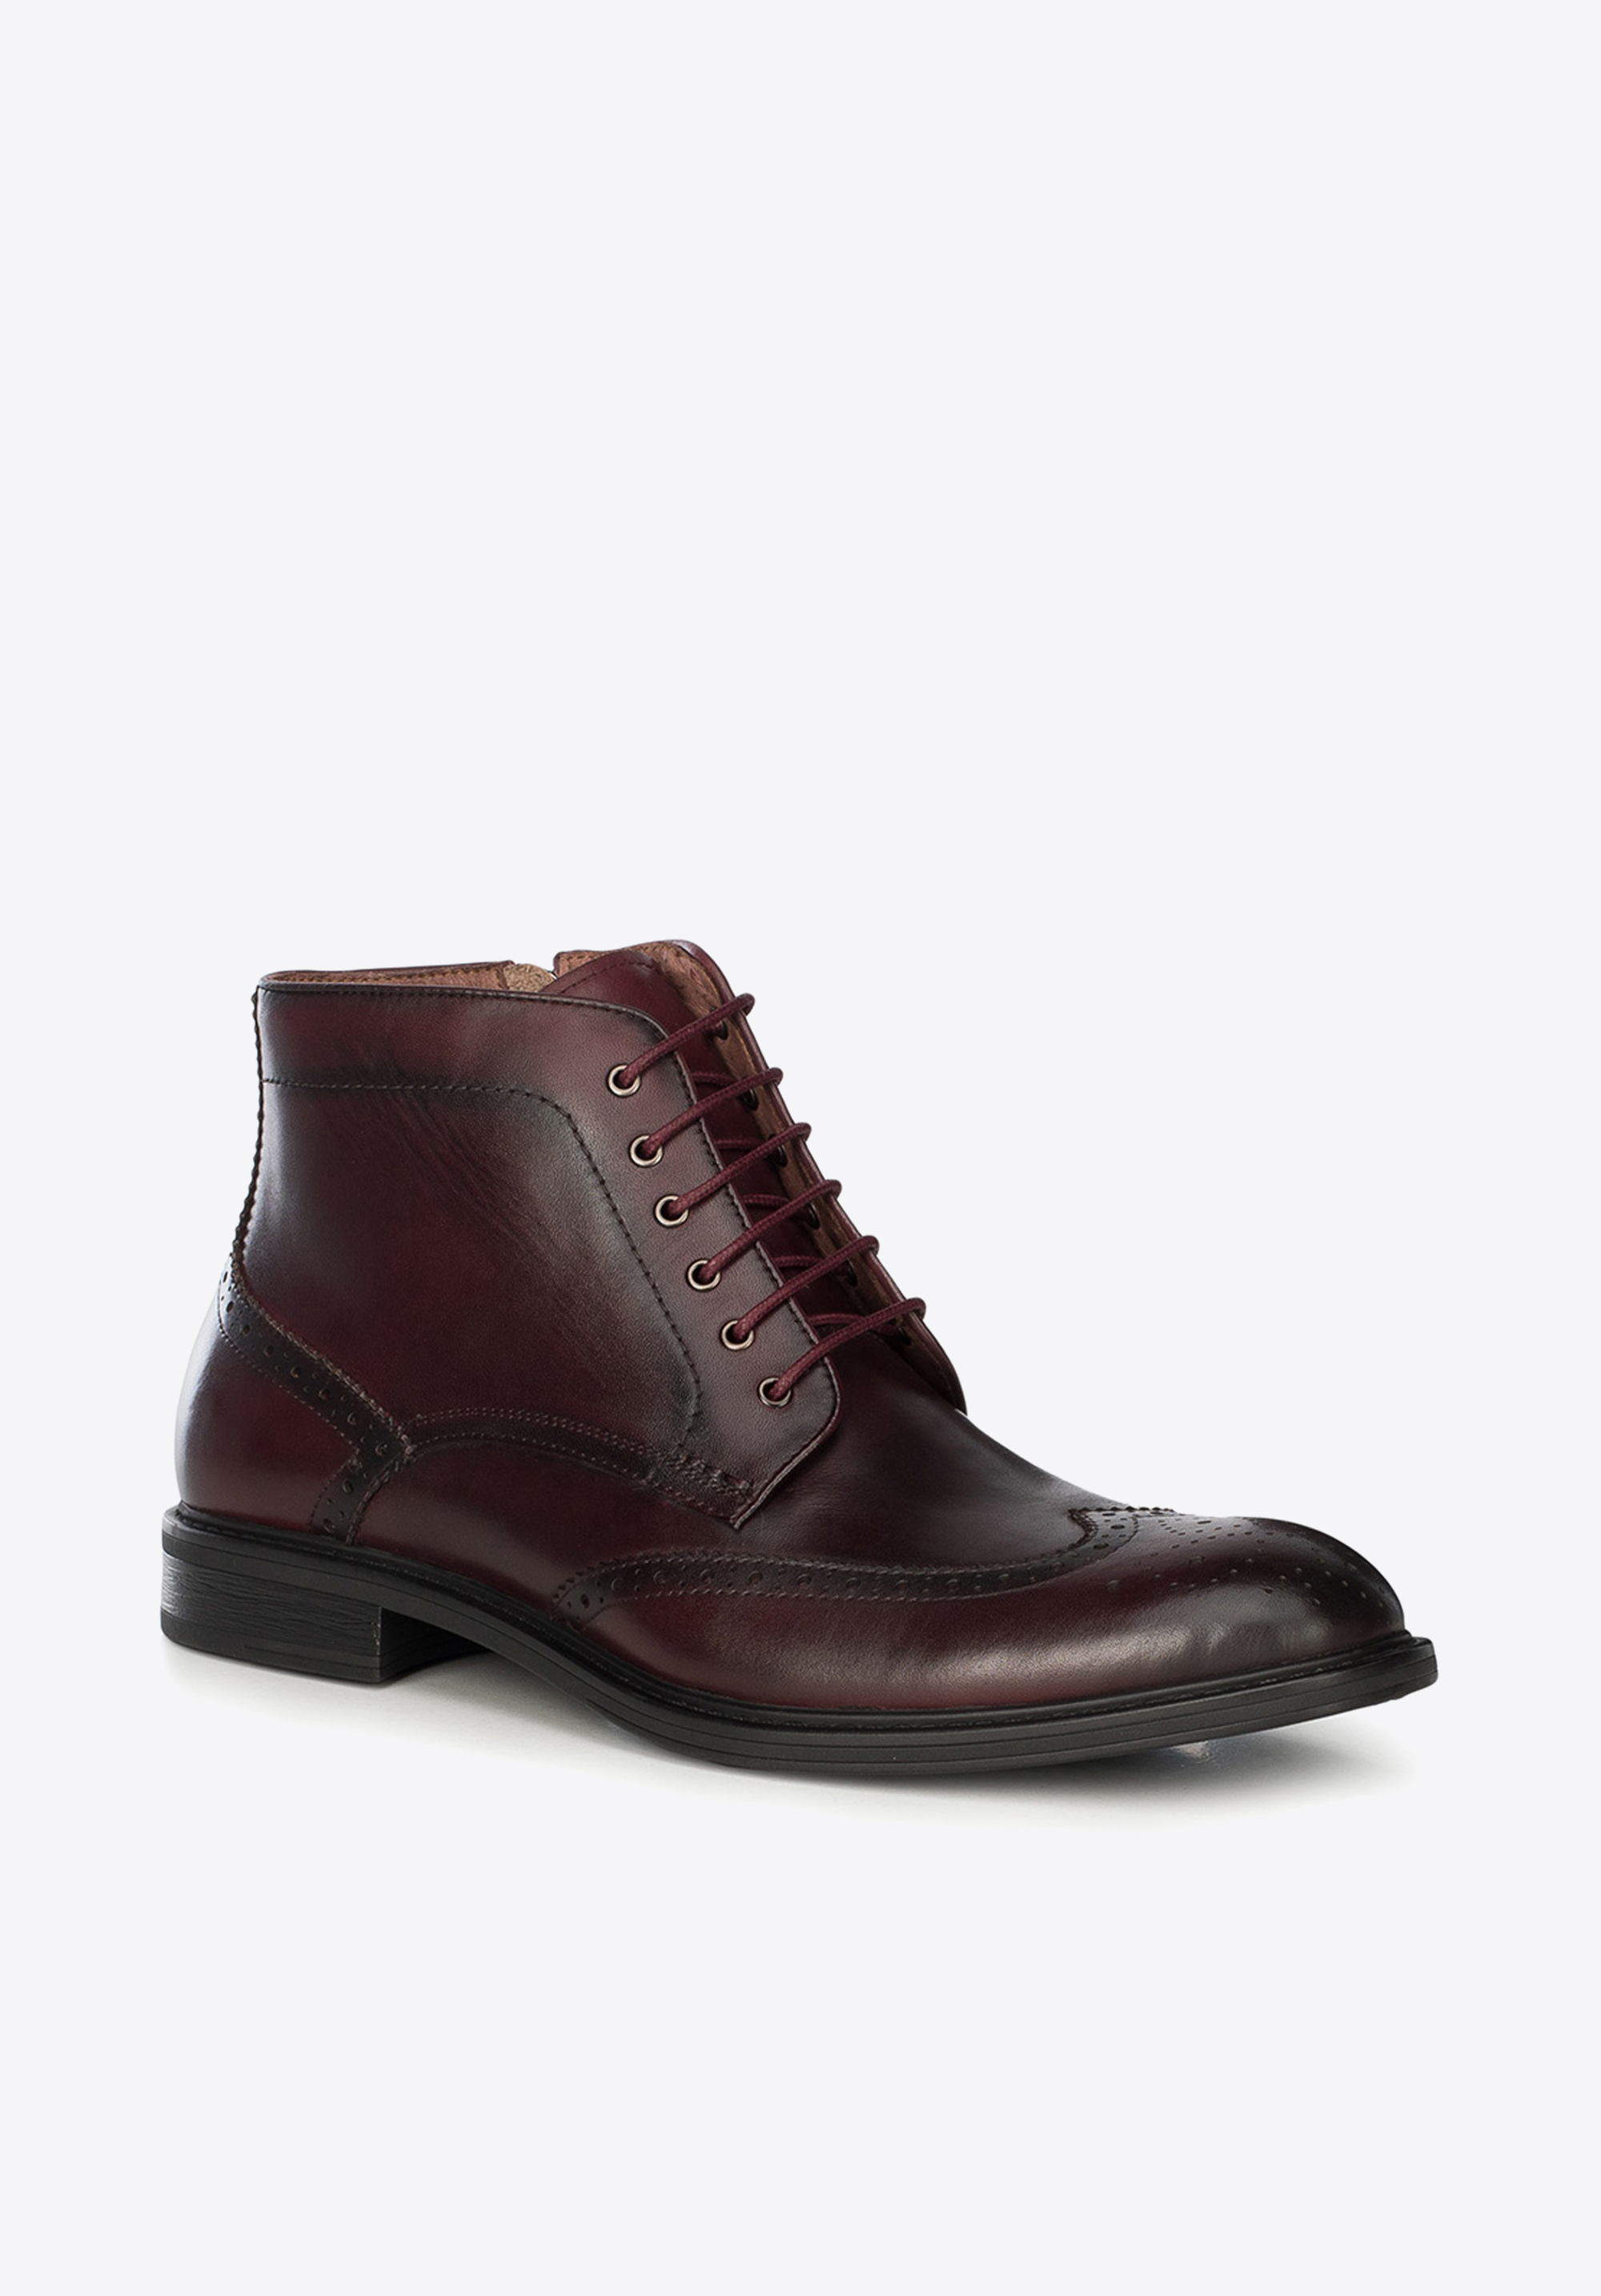 Men's leather lace up boots | WITTCHEN | 91-M-910